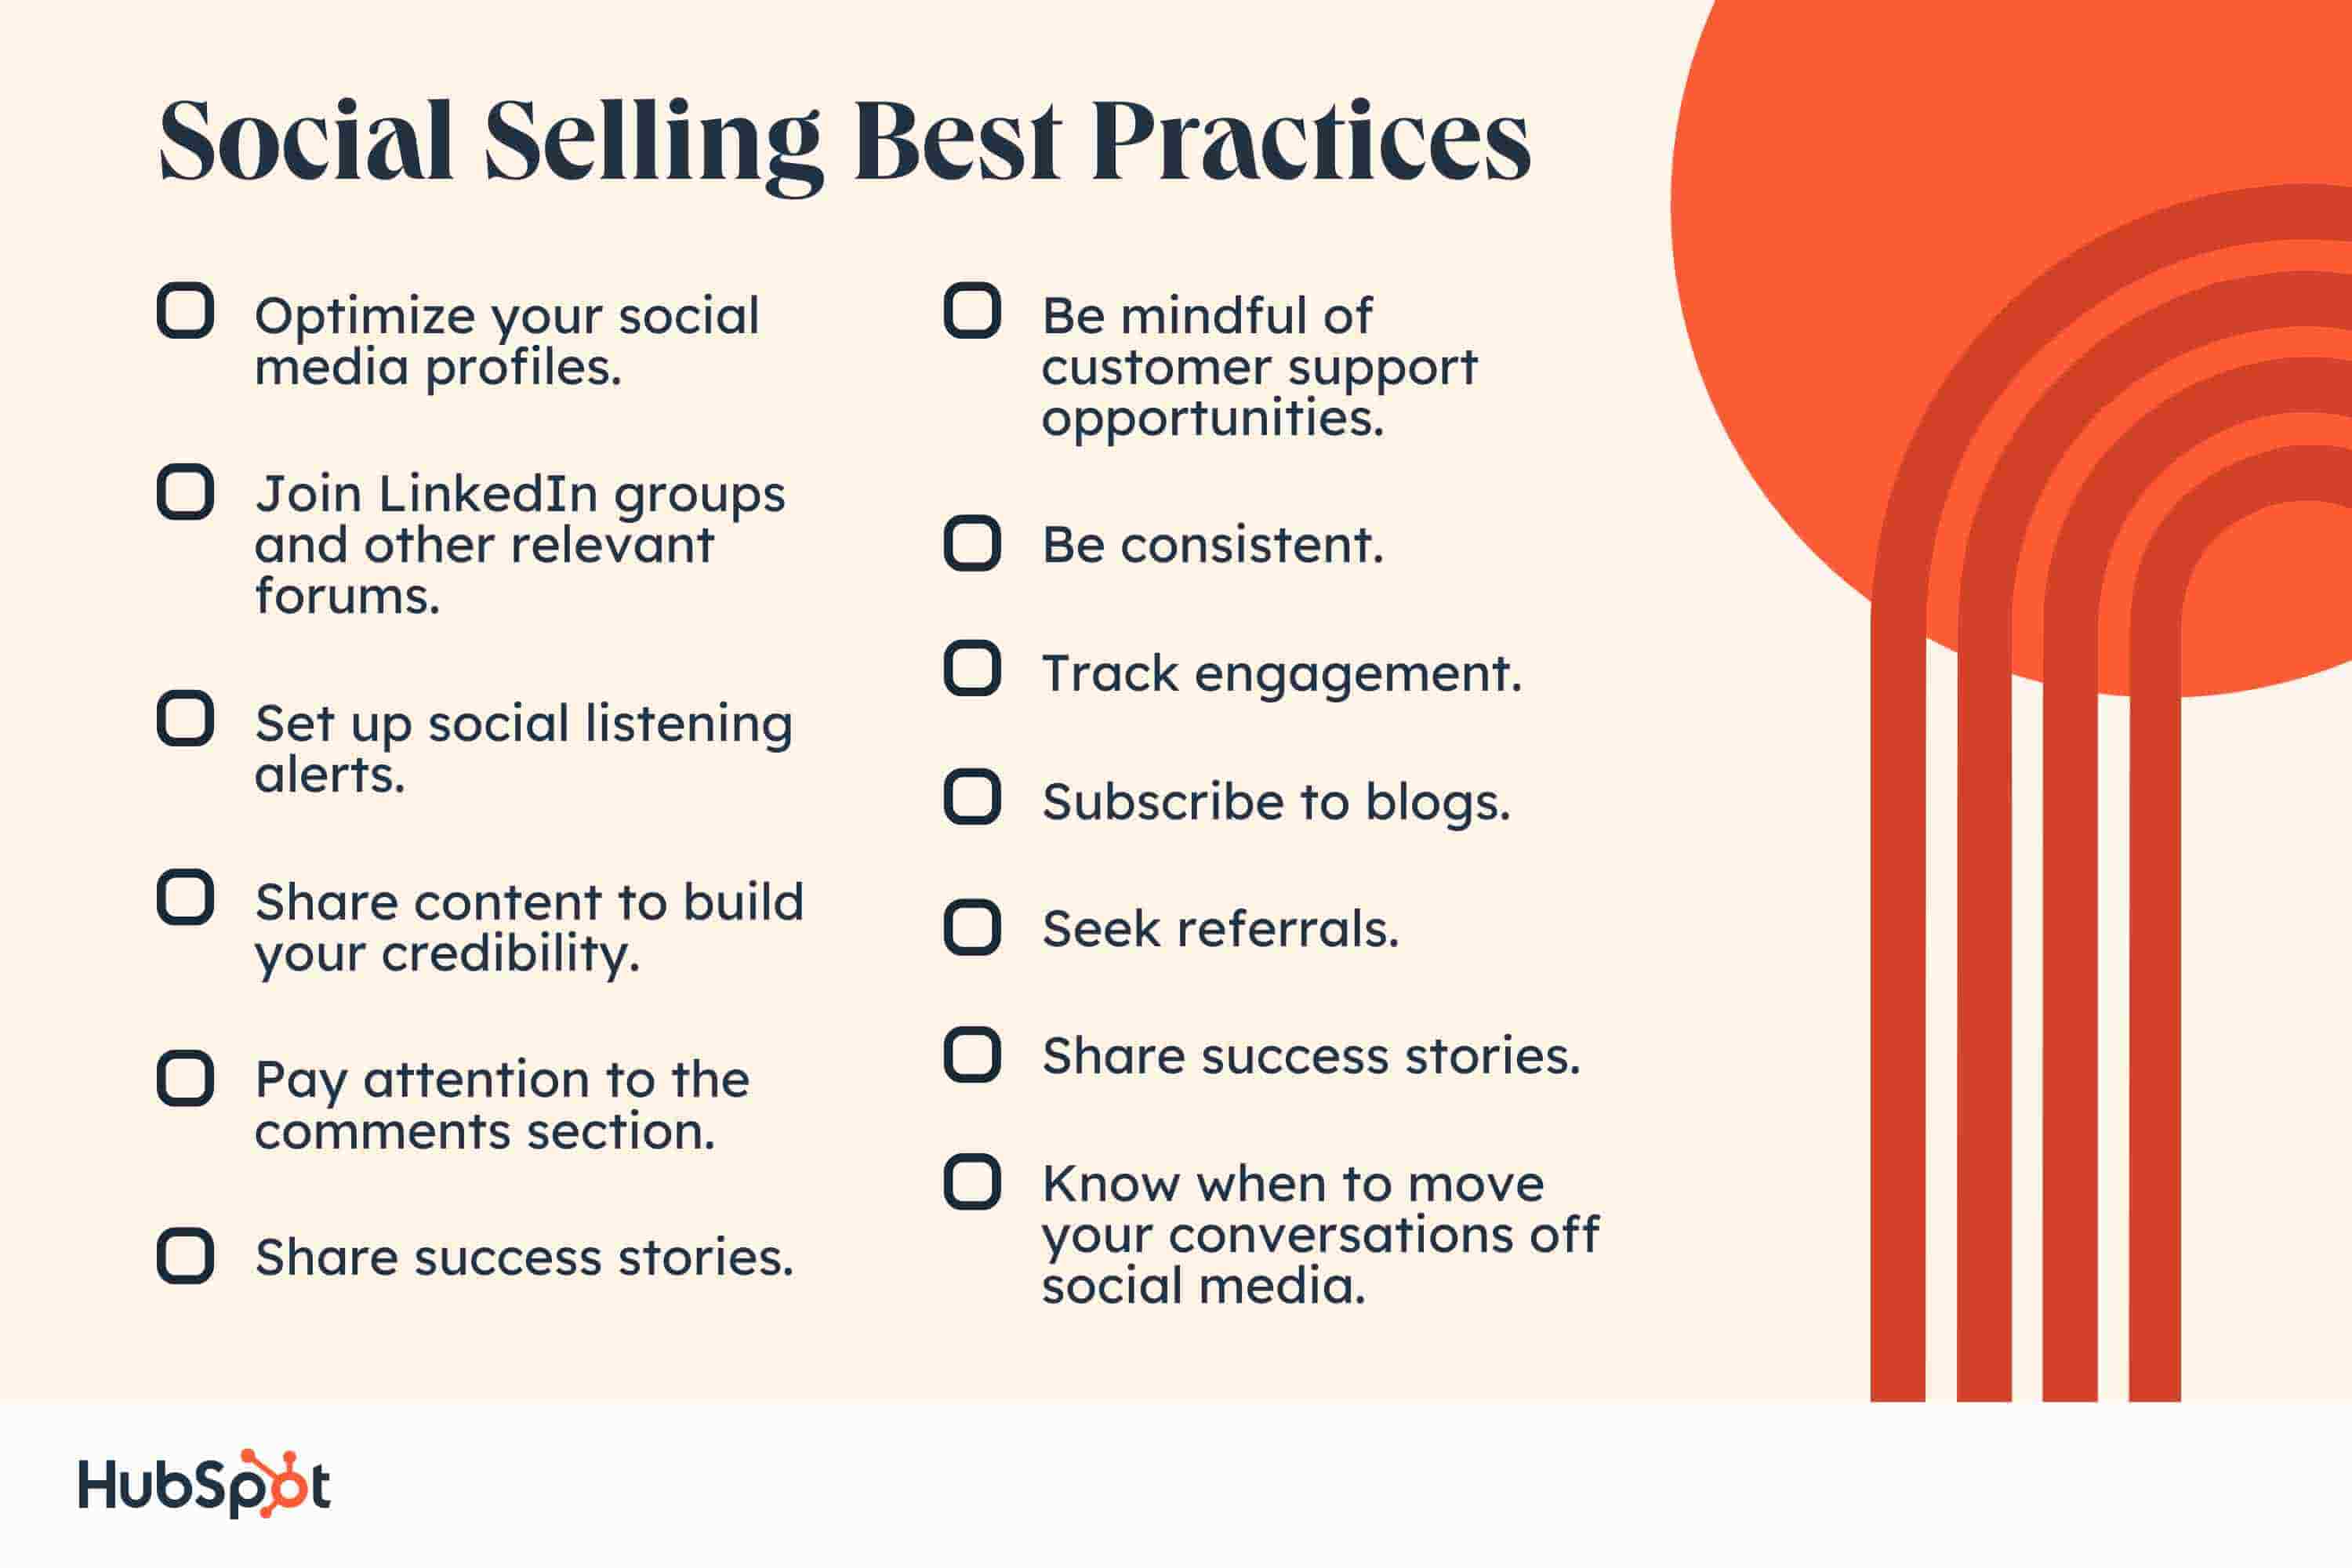 Social Selling Best Practices. Optimize your social media profiles. Join LinkedIn groups and other relevant forums. Set up social listening alerts. Share content to build your credibility. Pay attention to the comments section. Share success stories. Be mindful of customer support opportunities. Be consistent. Track engagement. Subscribe to blogs. Seek referrals. Share success stories. Know when to move your conversations off social media.